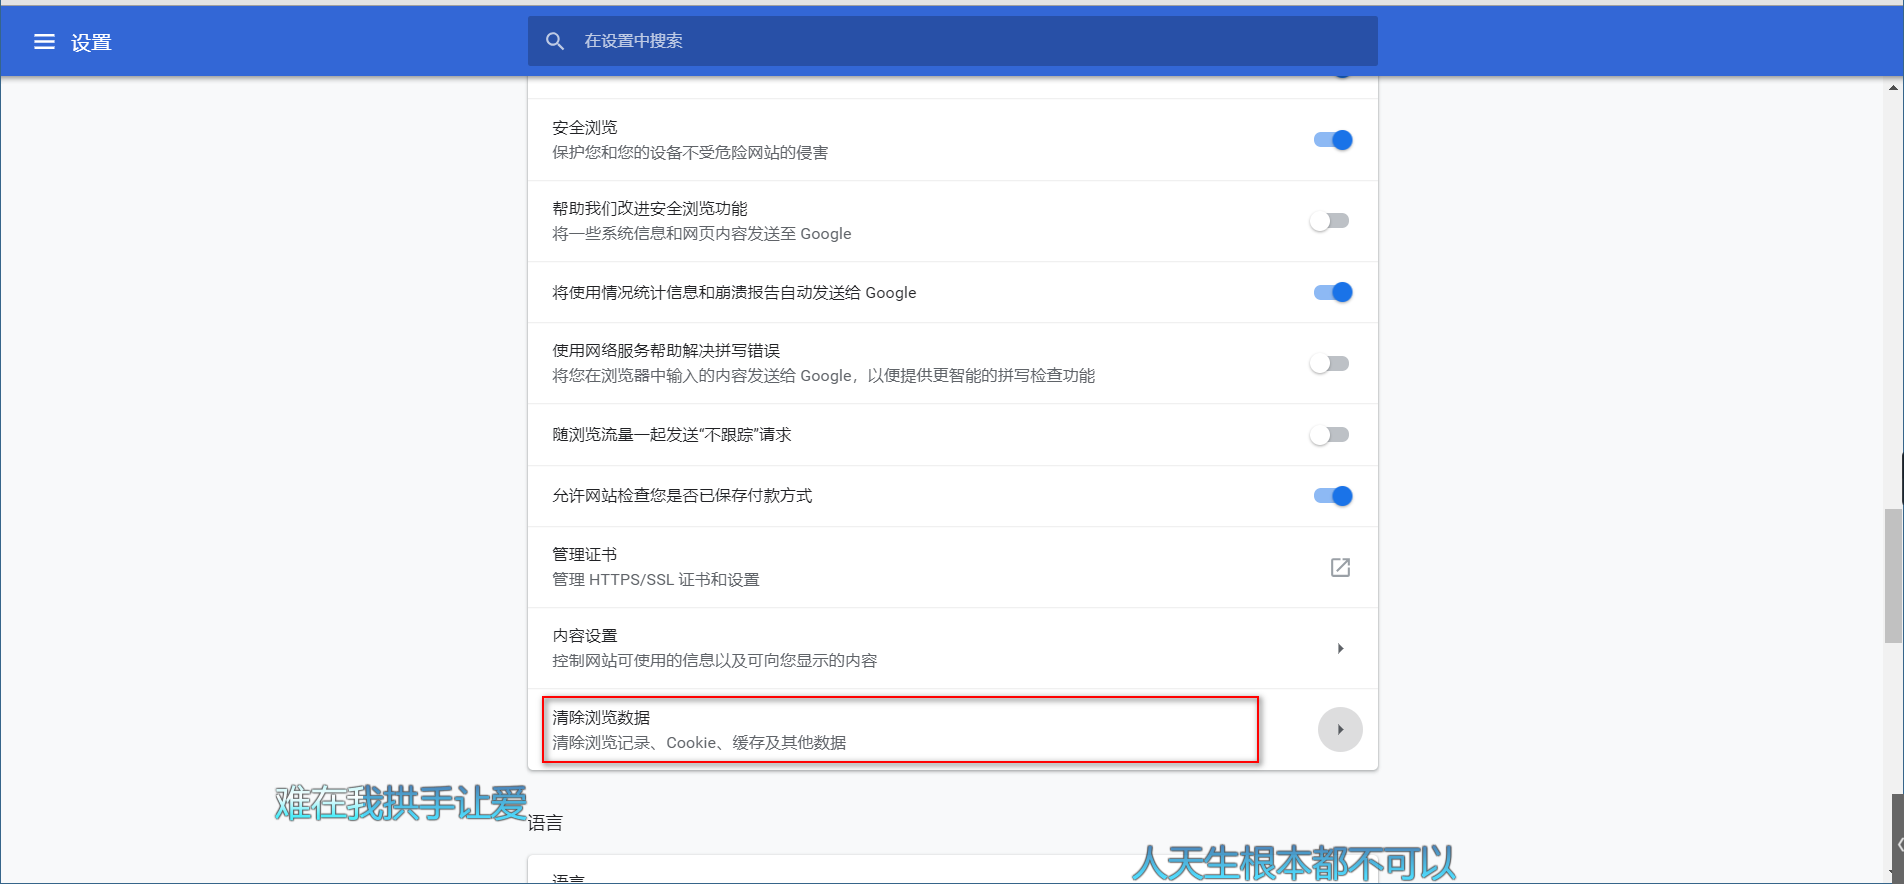 Springboot使用Swagger2报错: Unable to infer base url.This is common when using dynamic servlet